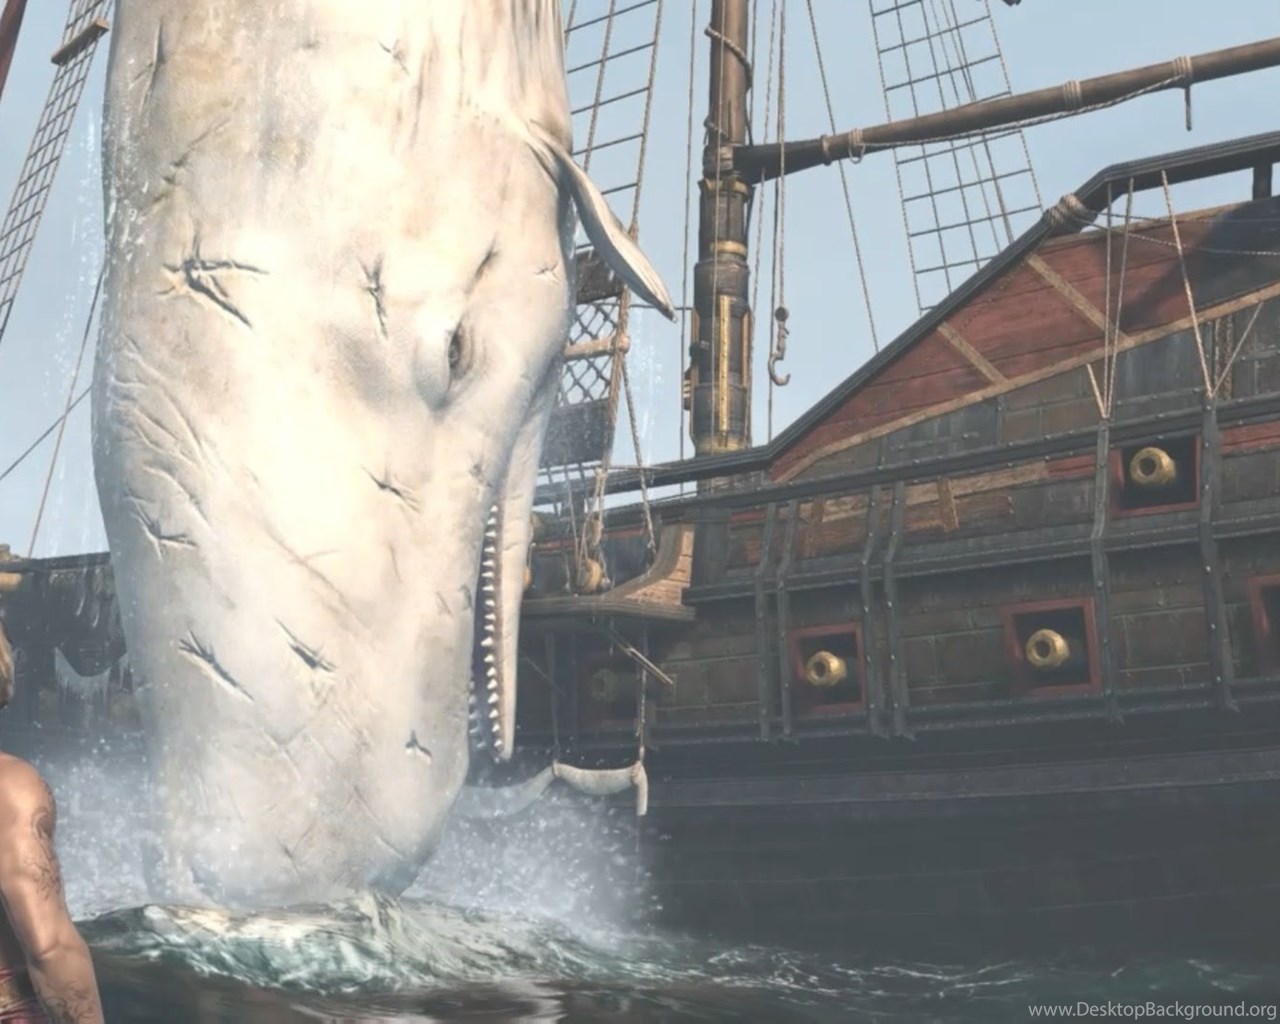 Moby dick easter egg assassin's creed